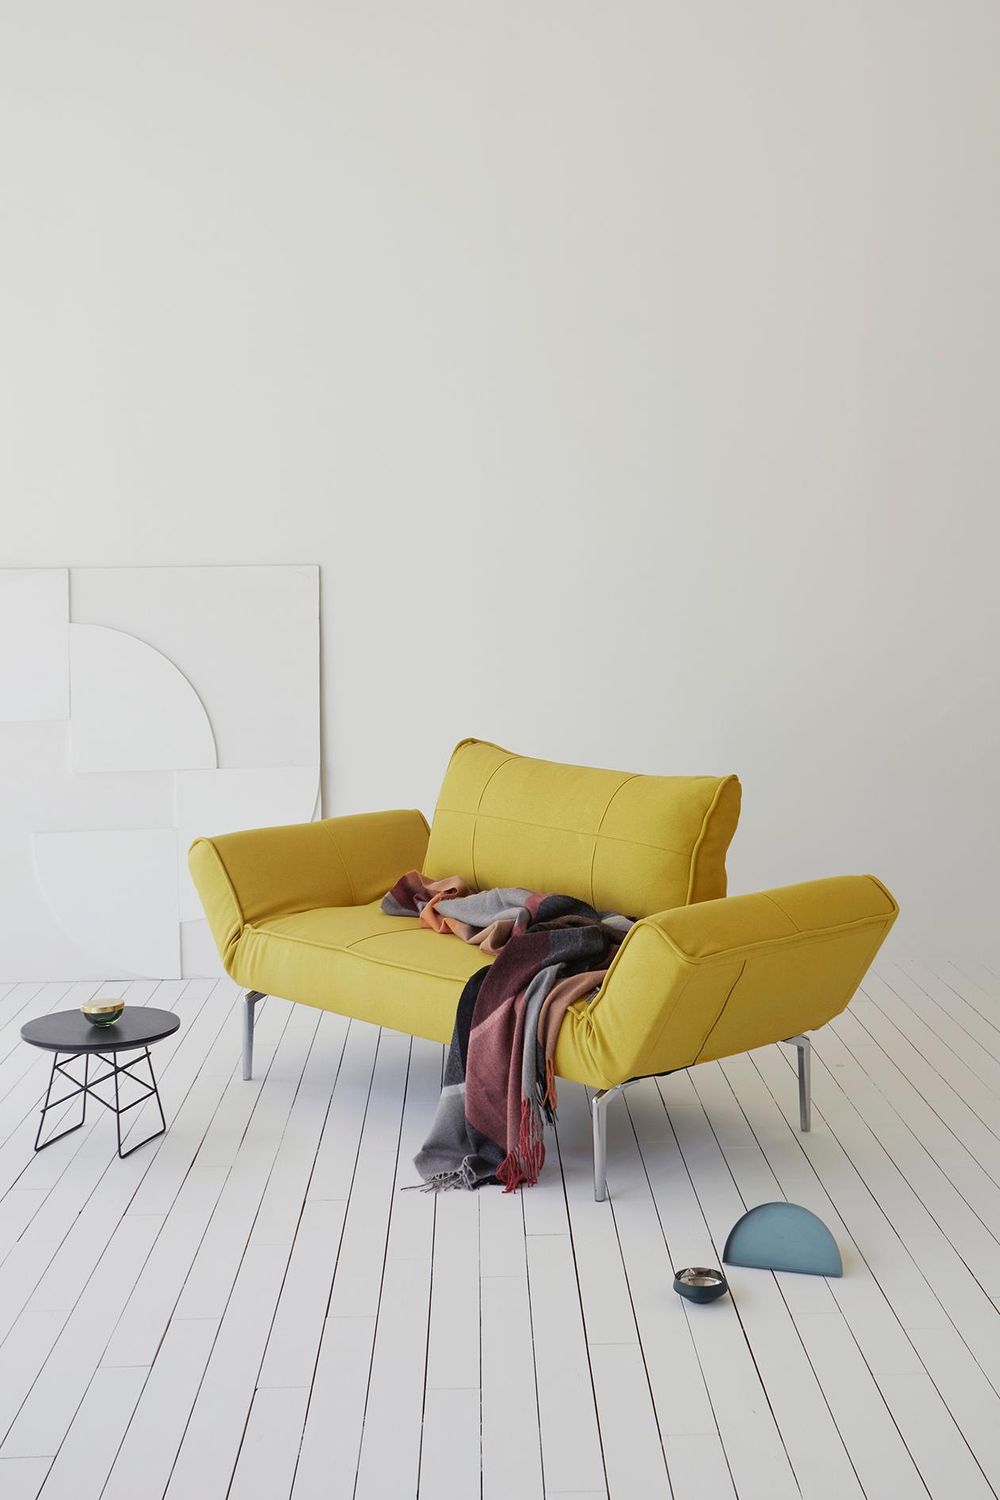 Innovation Living™ Zeal Straw Daybed - 554 Soft Mustard Flower is a yellow sofa bed that comes in many colors and folds and unfolds as you need